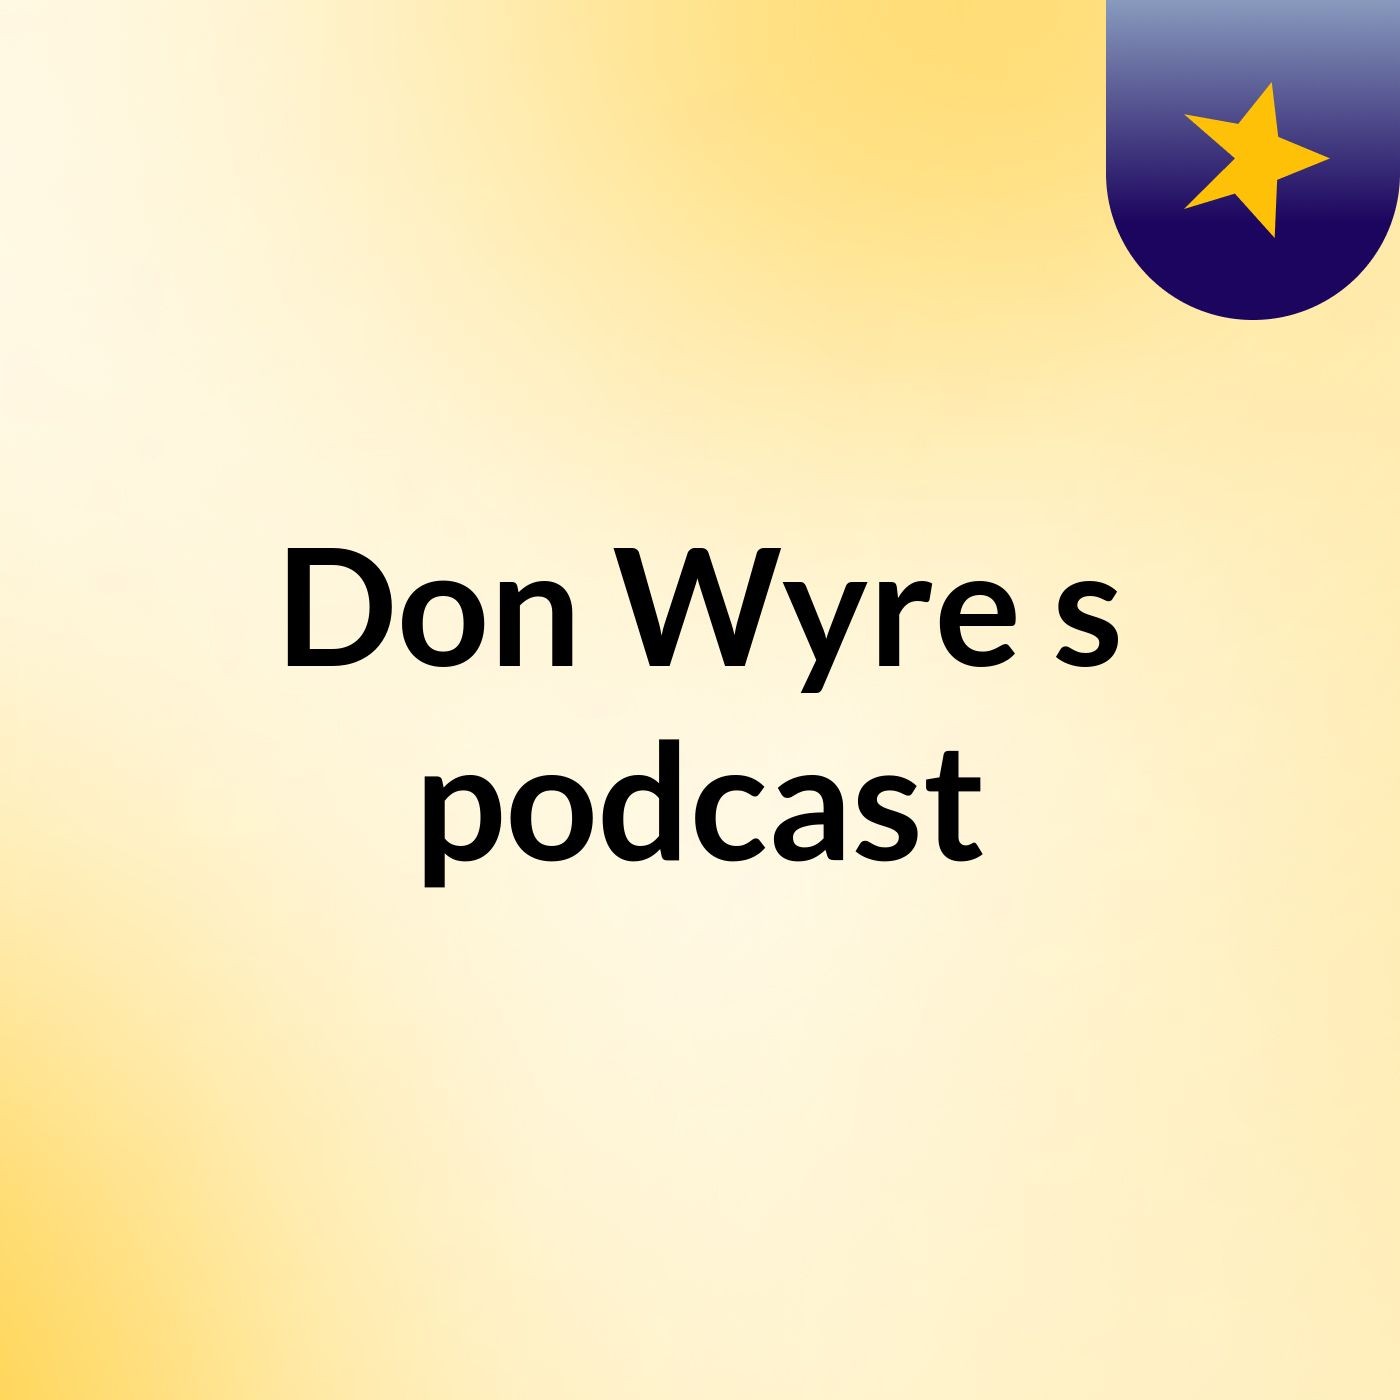 Don Wyre's podcast